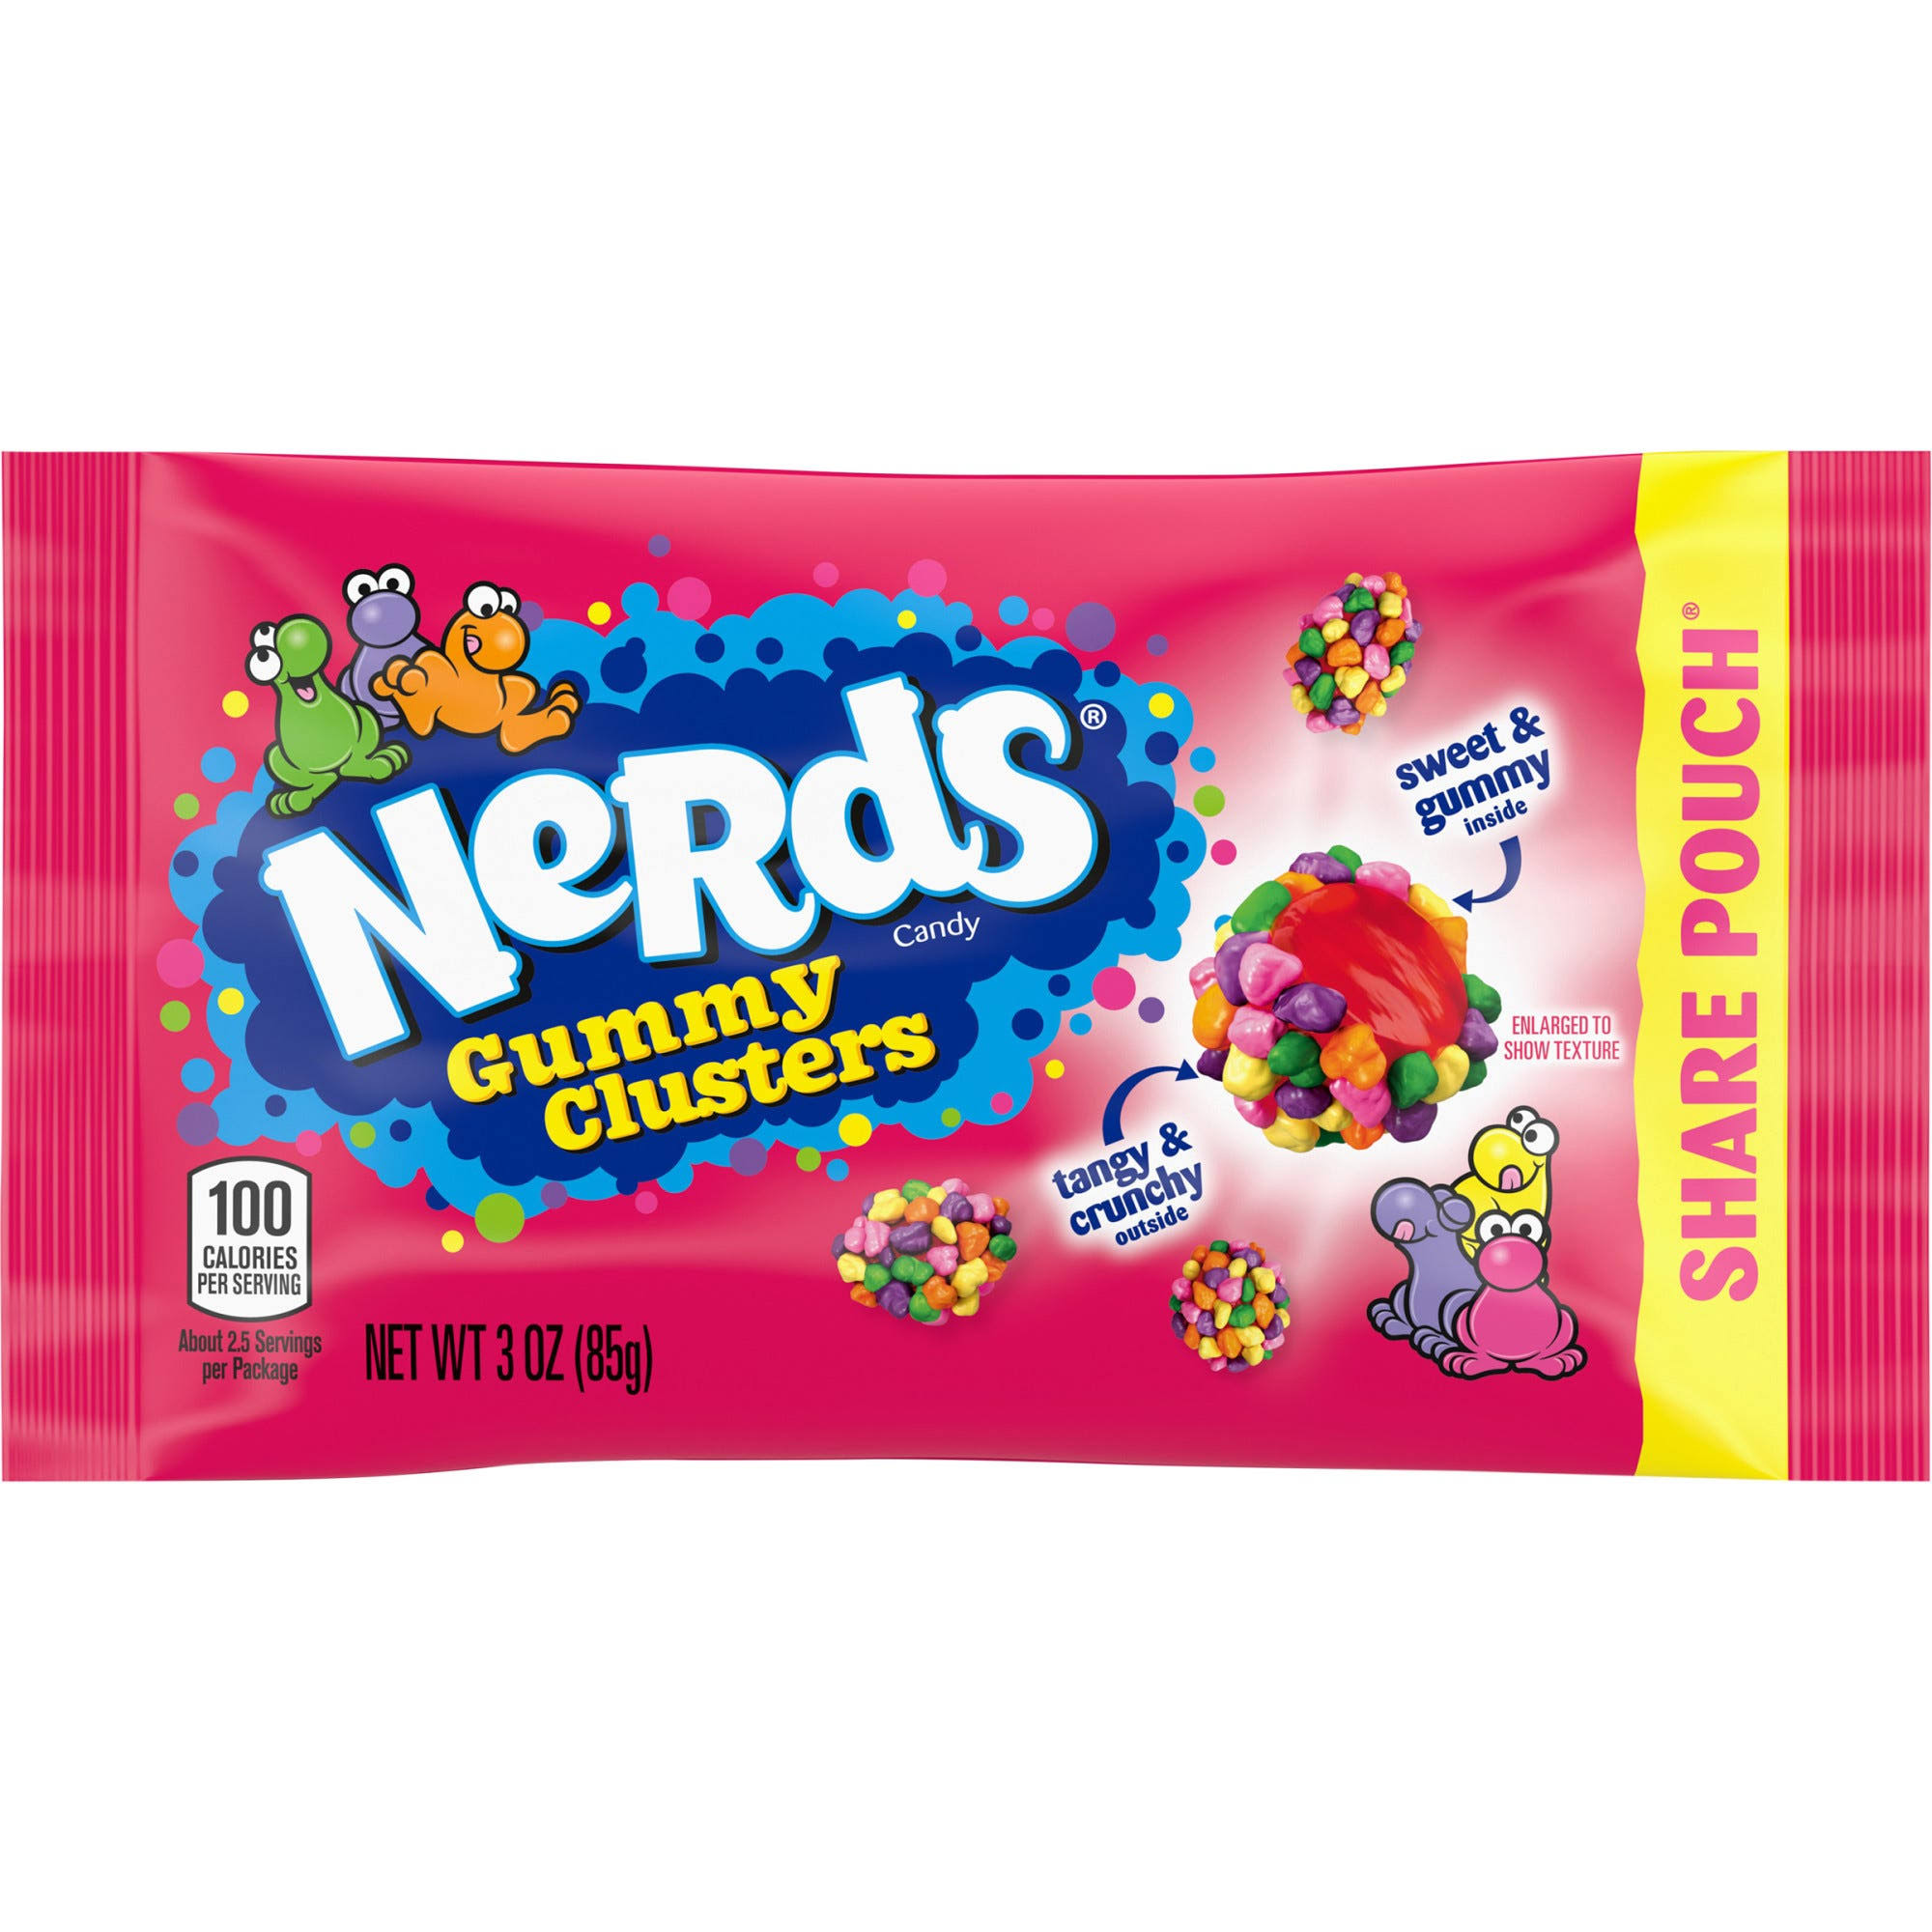 Nerds gummy clusters share pack, 3 oz